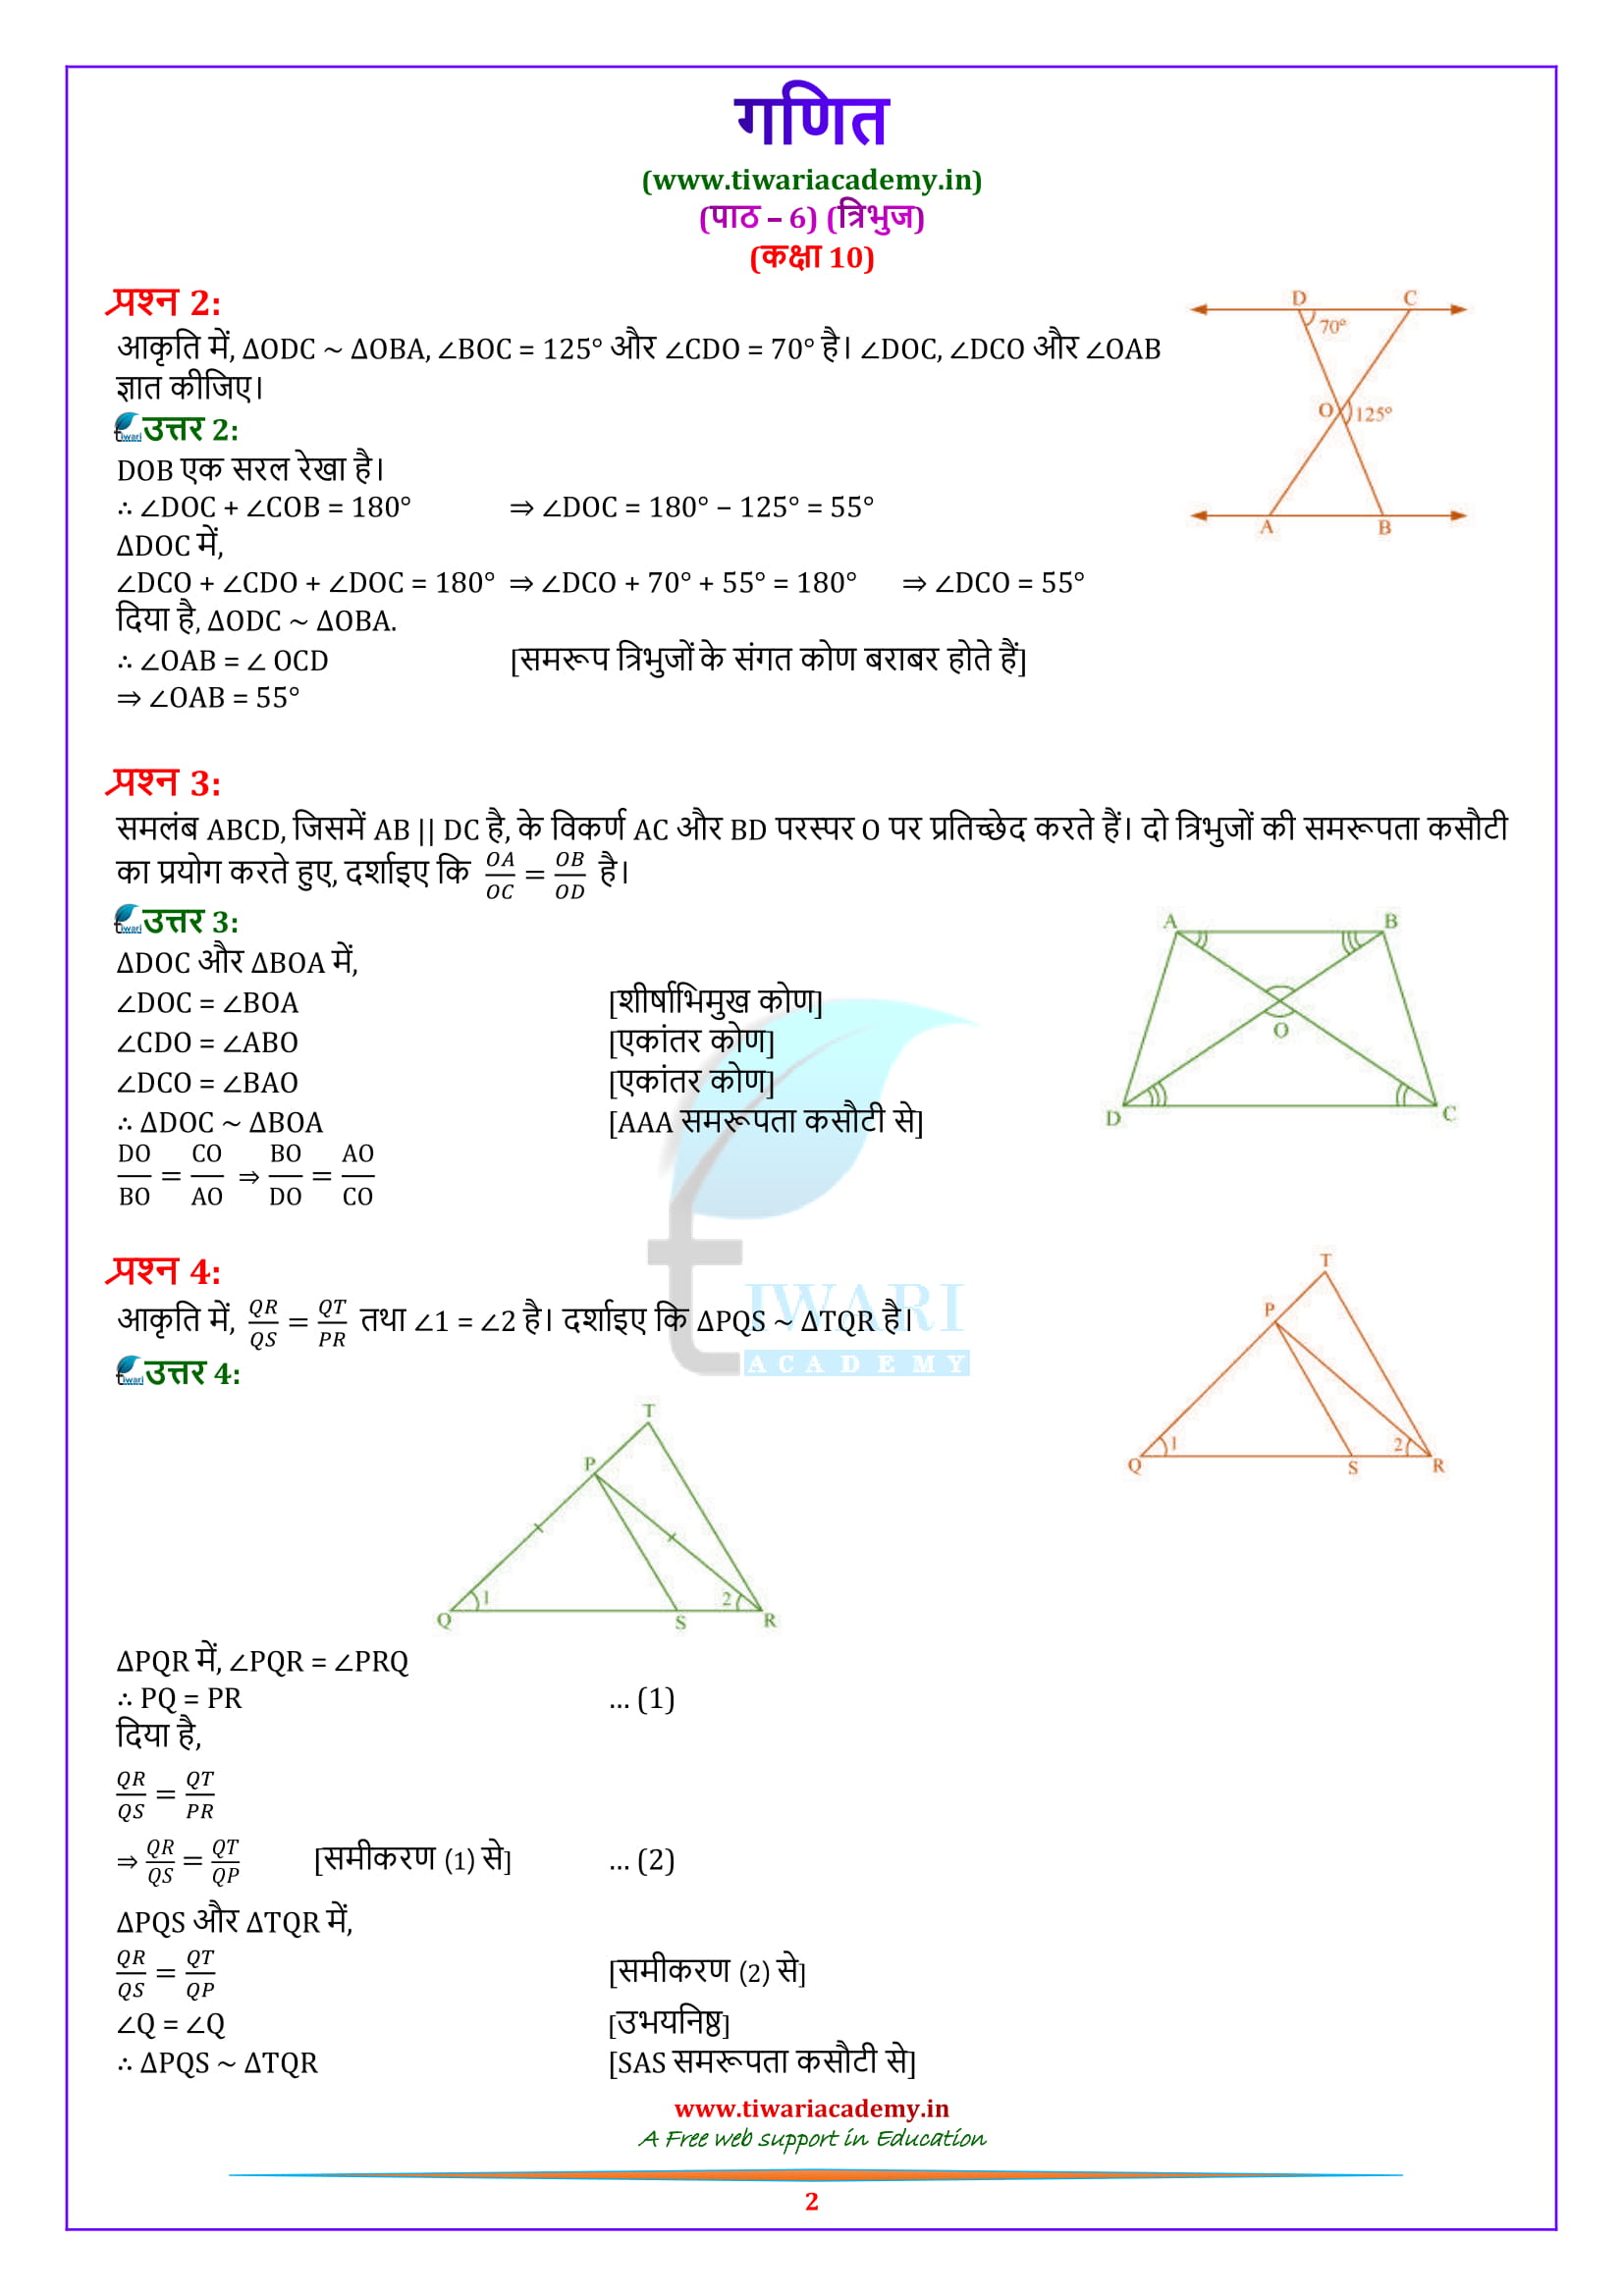 10 Maths Exercise 6.3 solutions question 1, 2, 3, 4, 5, 6, 7, 8, 9, 10